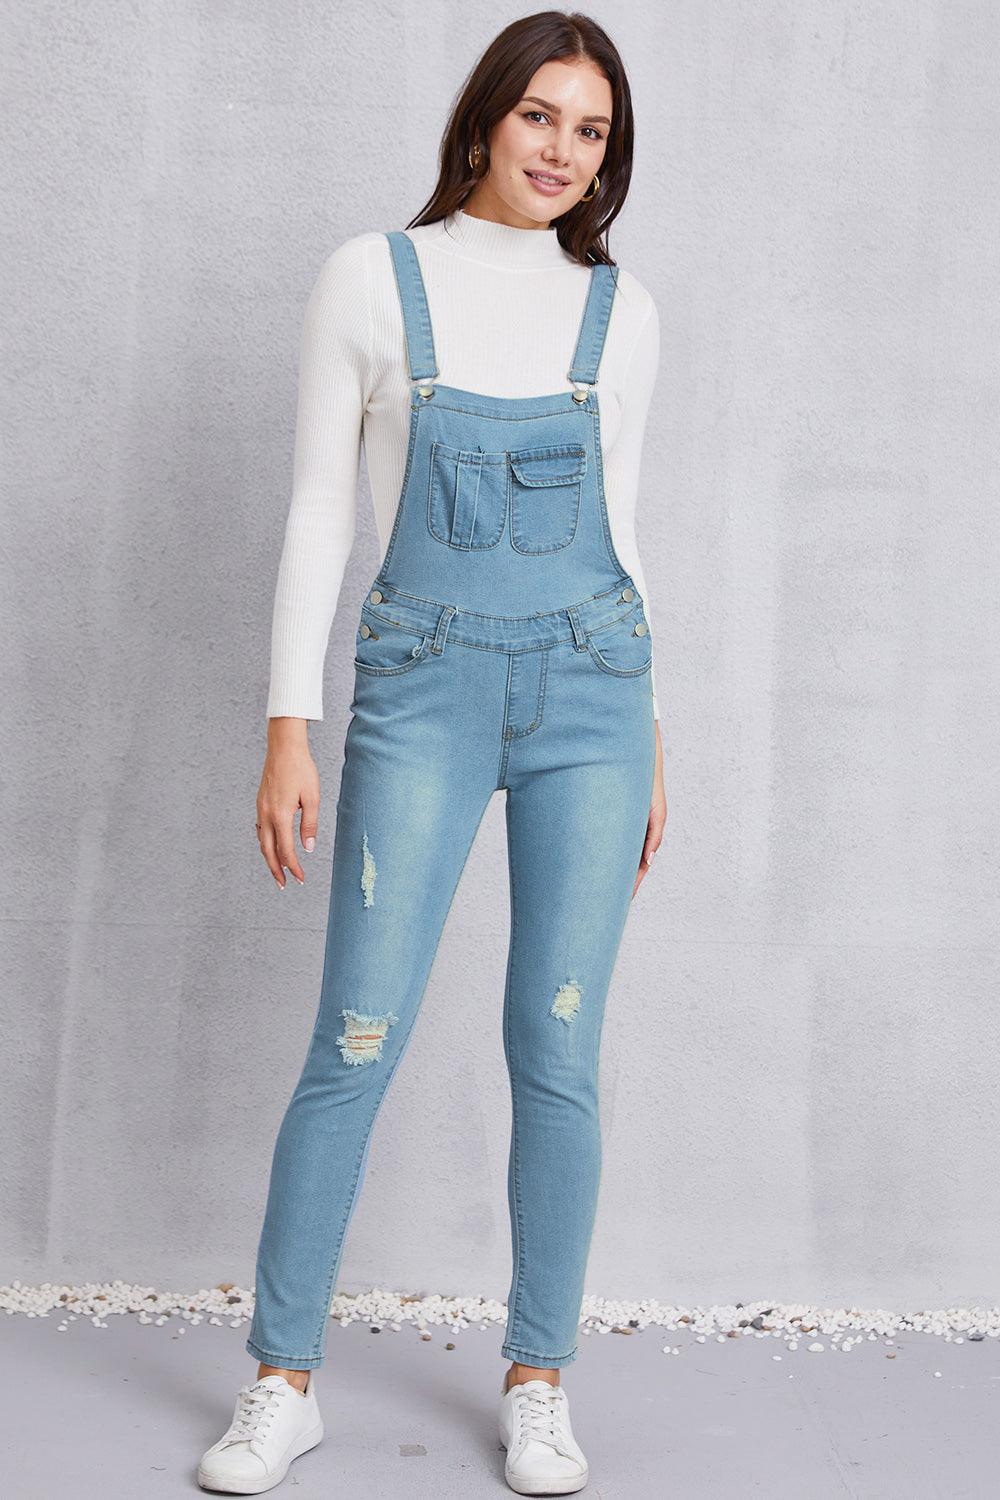 Distressed Washed Denim Overalls with Pockets - Lucianne Boutique